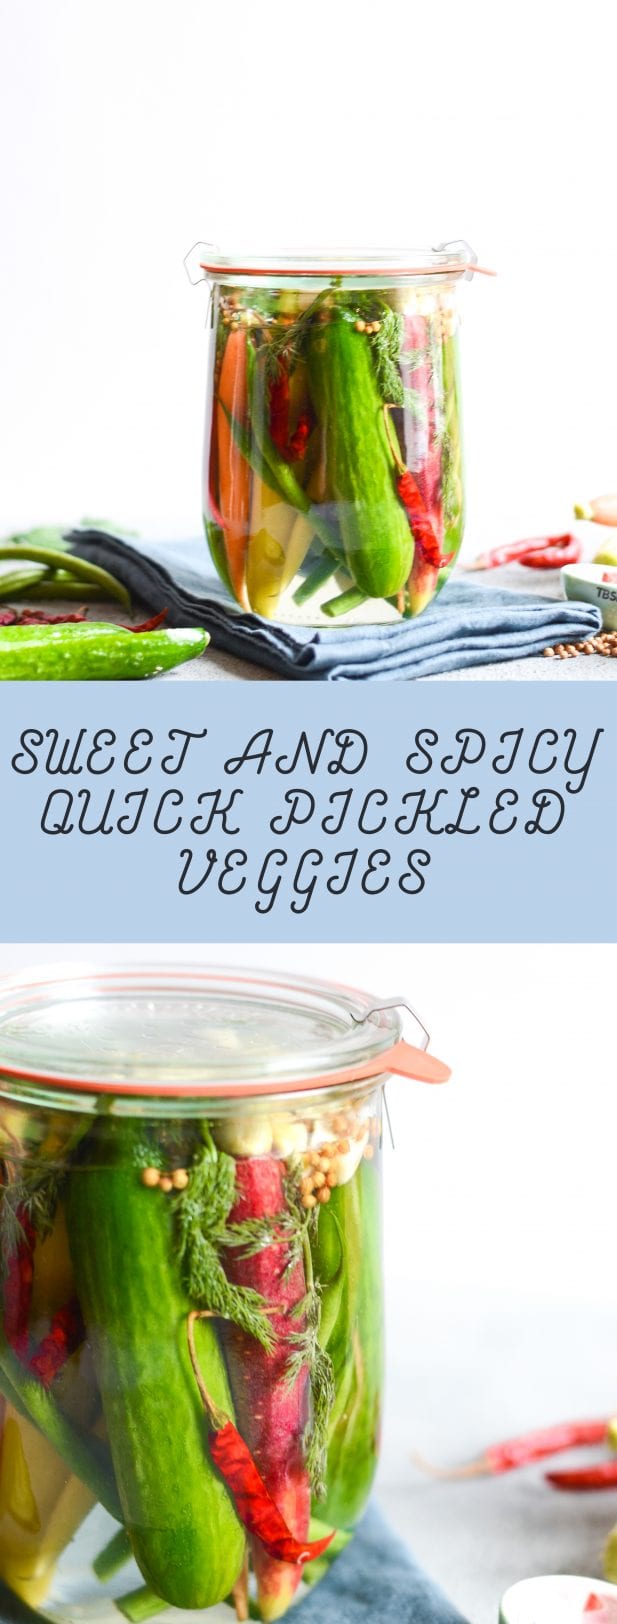 Sweet and Spicy Quick Pickled Veggies